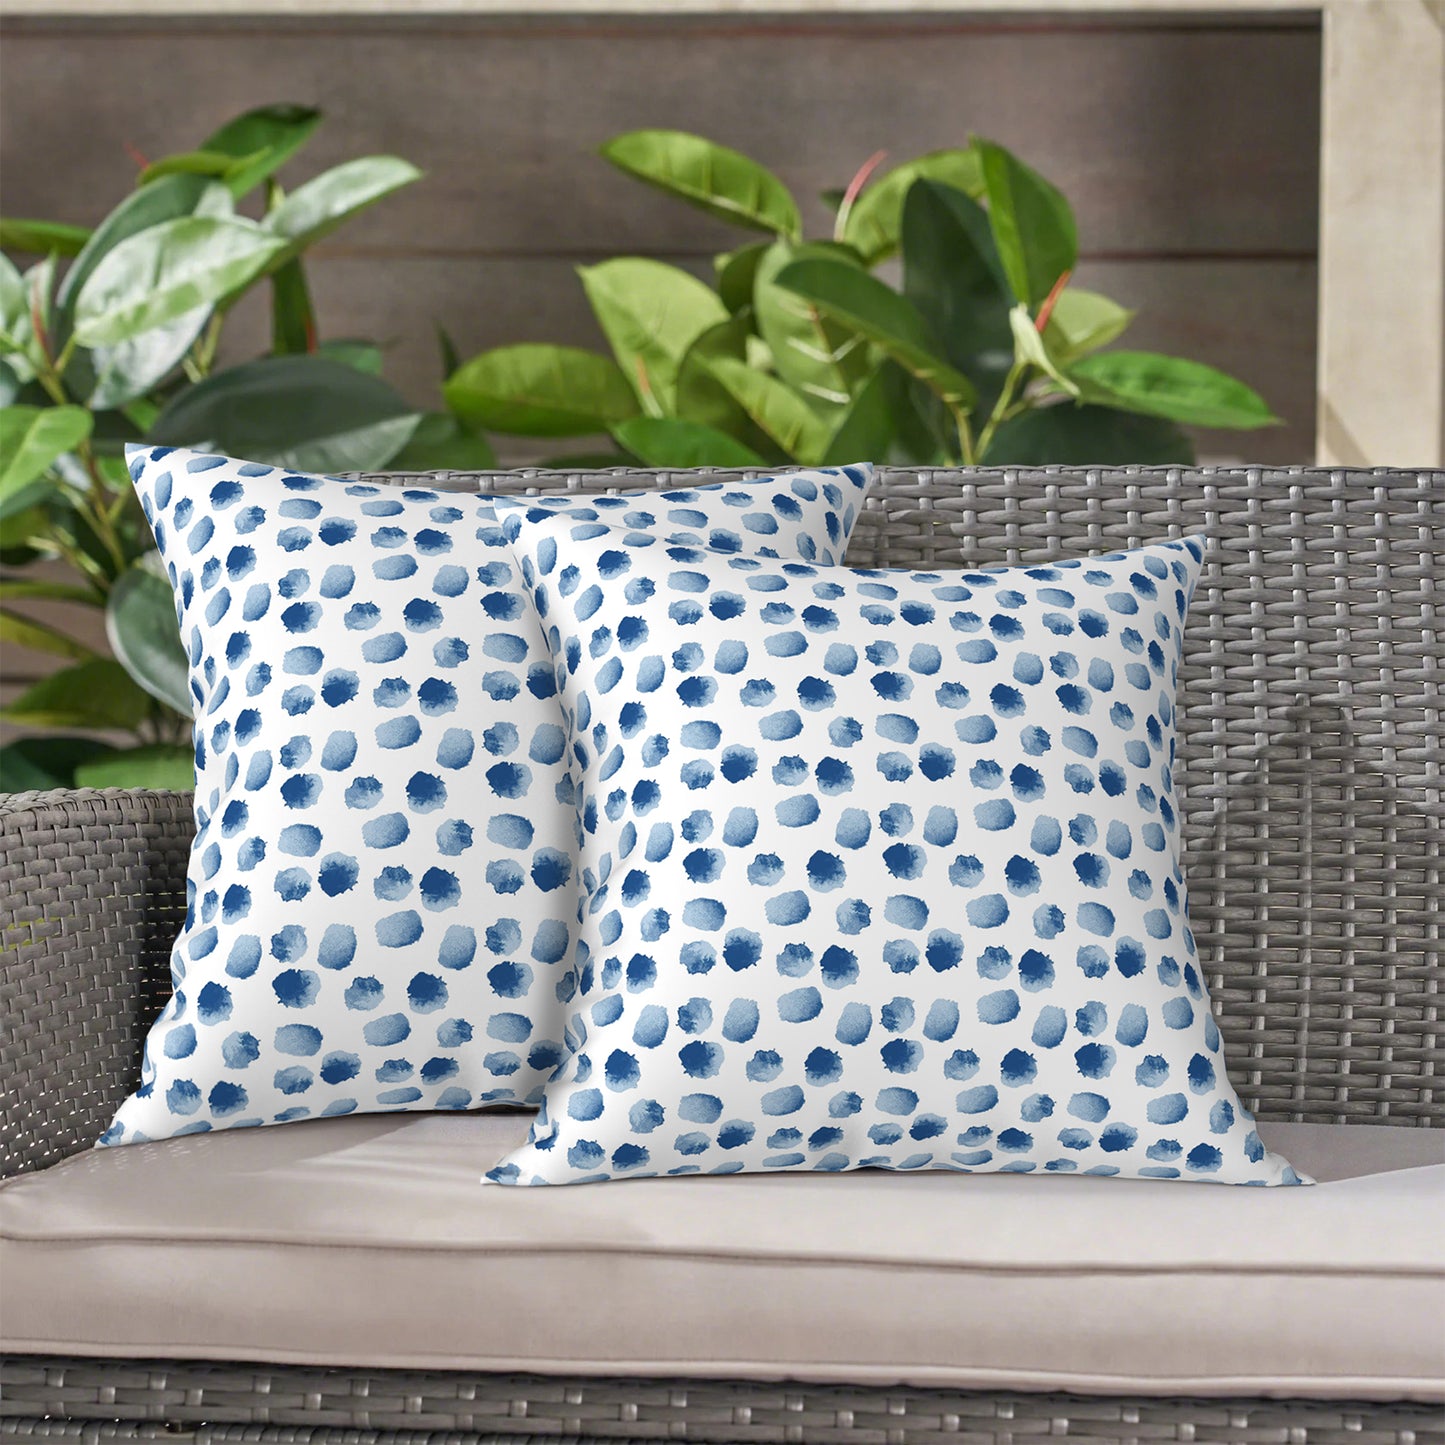 Melody Elephant Patio Throw Pillows with Inners, Fade Resistant Square Pillow Pack of 2, Decorative Garden Cushions for Home, 18x18 Inch, Brush Blue